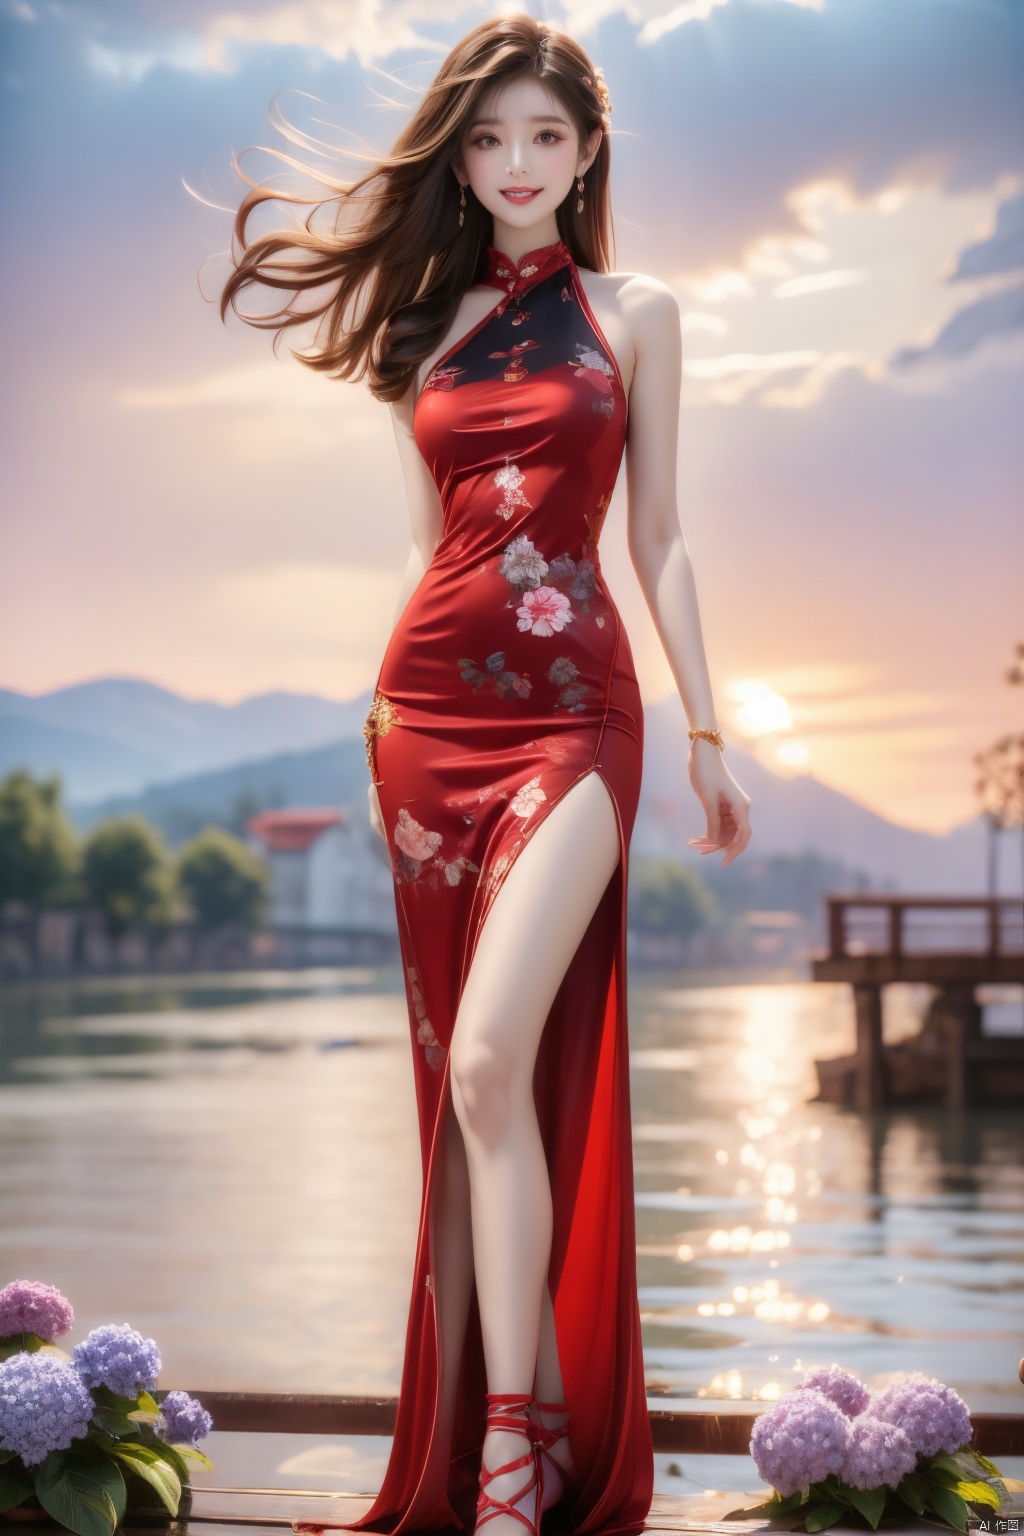  (Best quality, masterpiece, details), (red:1.5), full body, 1 girl, beautiful face, side slit lace dress, white knee socks, plump figure, smile, red crowned crane, complex clothing, exquisite plantdepiction,floralbackground,details,highlydetailed,fullofhiddendetails,realskin,redandturquoise,hydrangea,blue,(mountain),(River), 1girl,